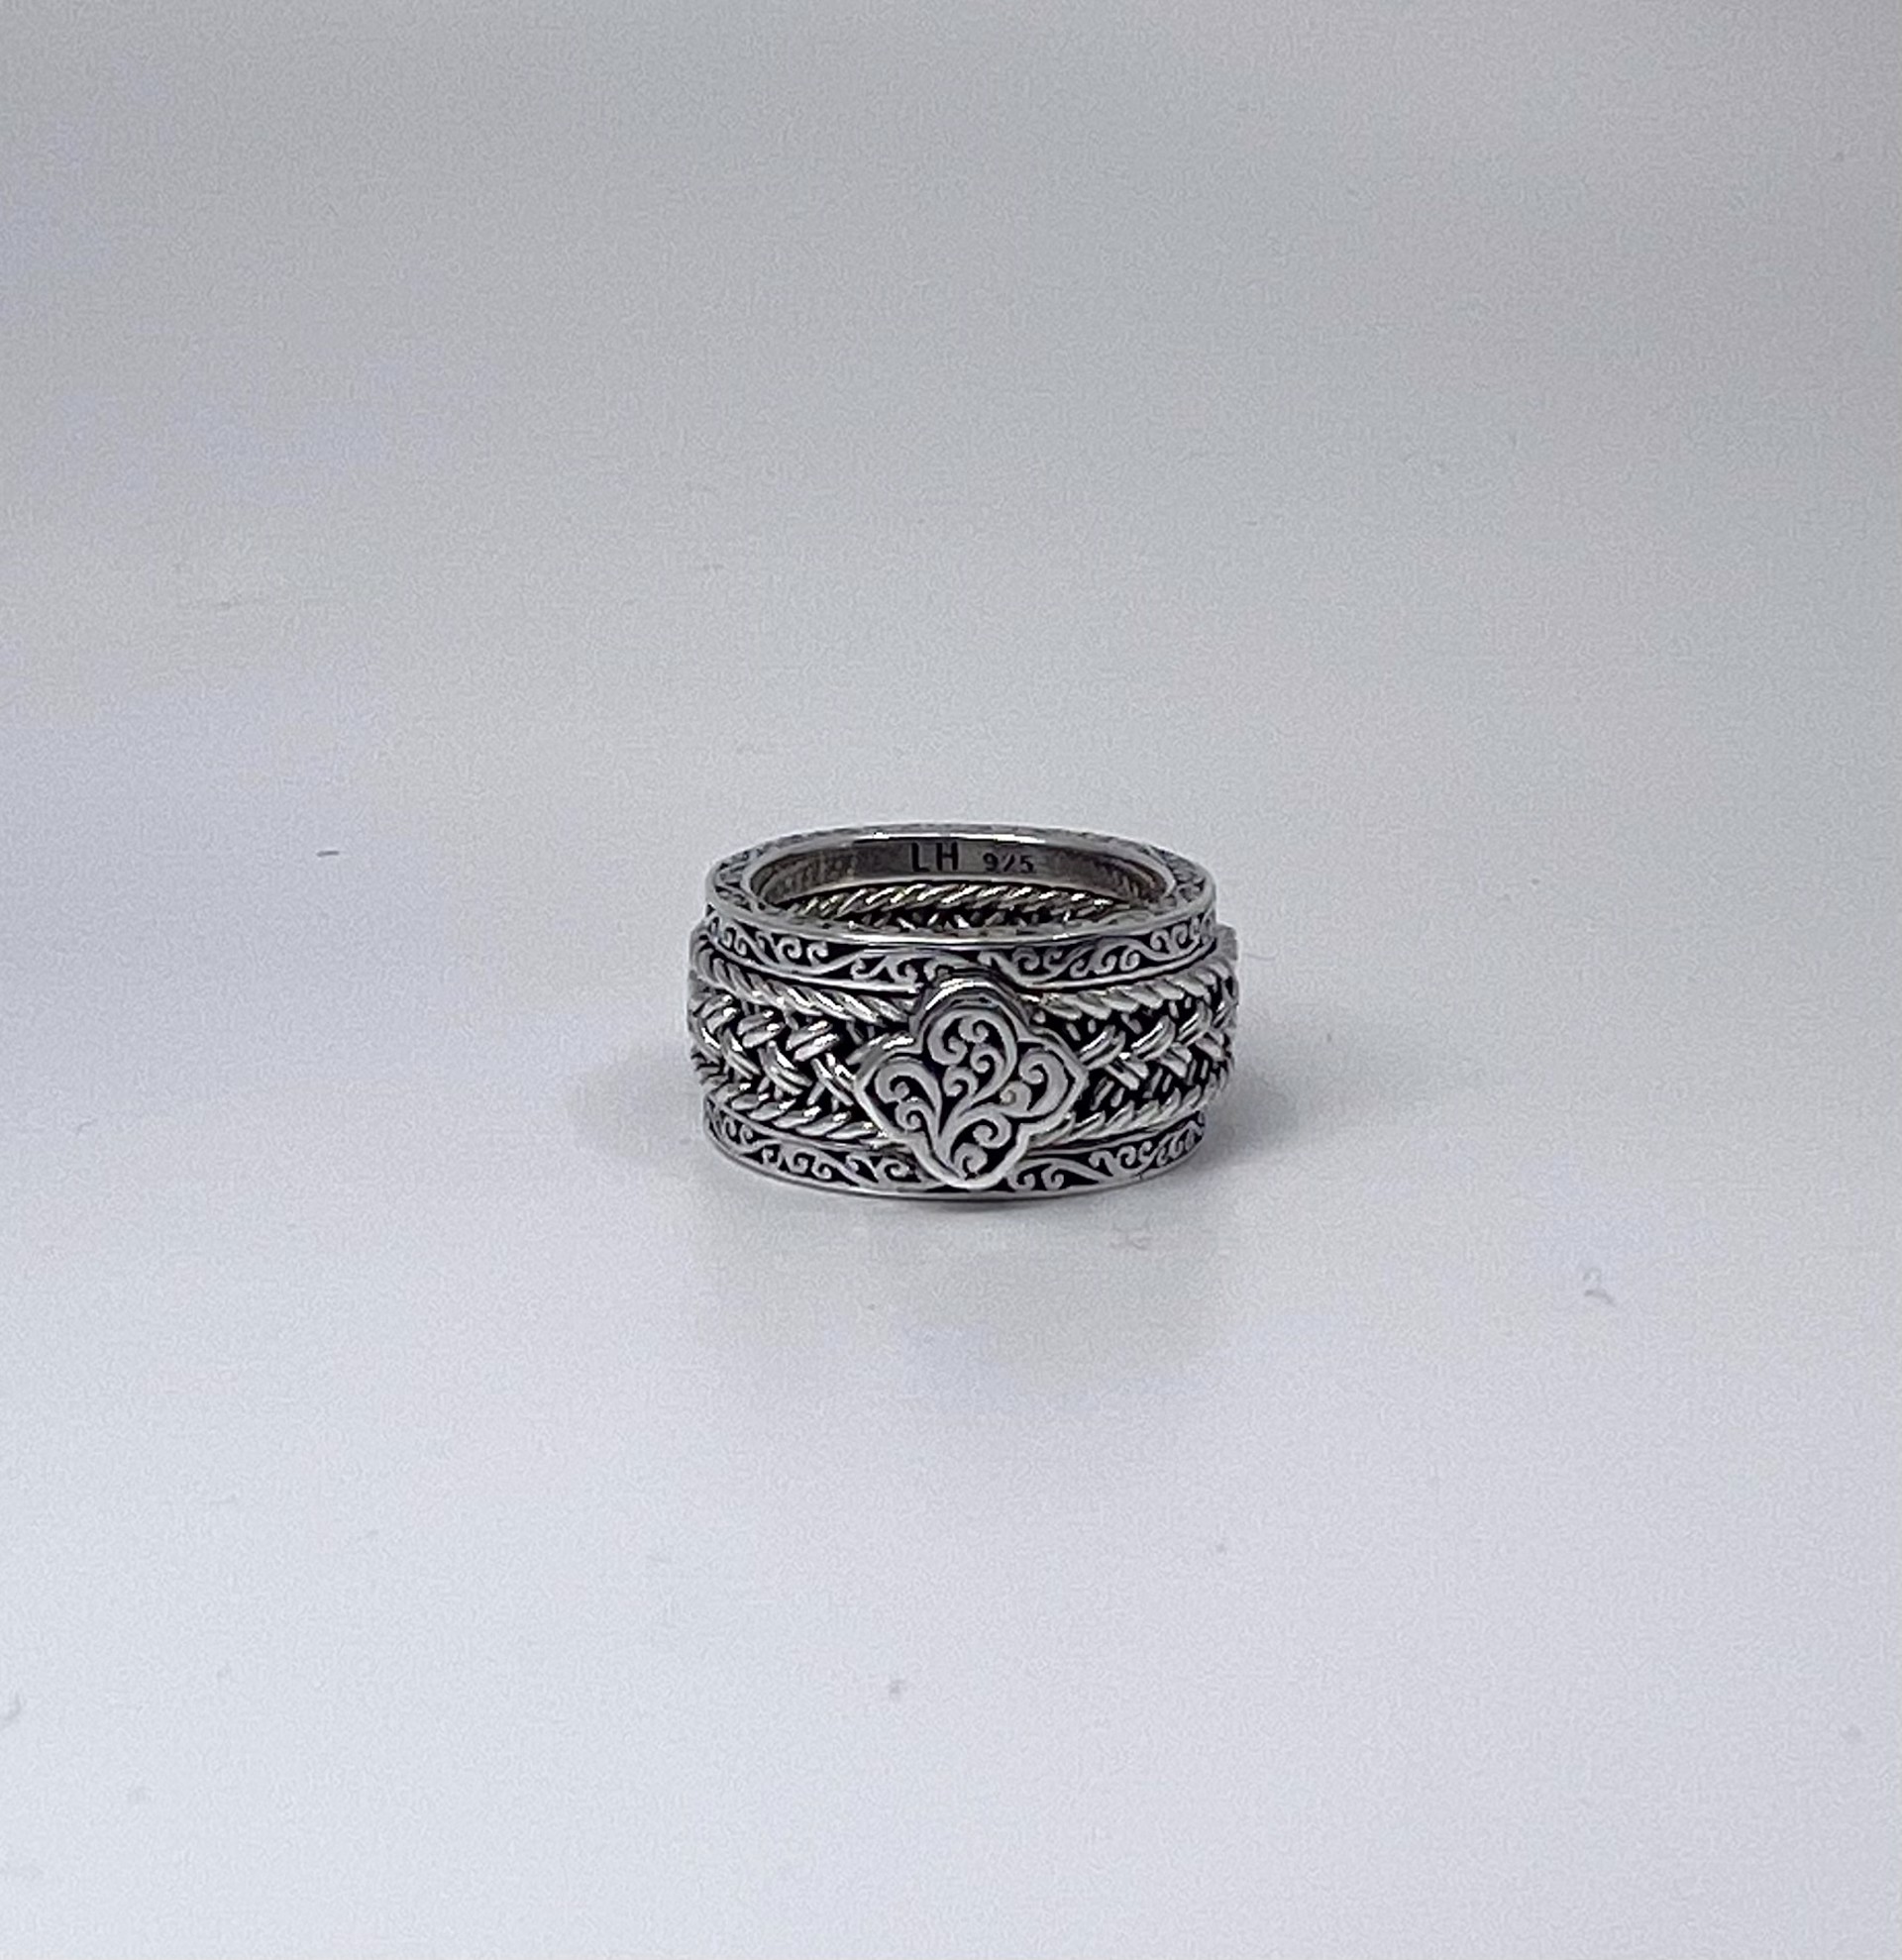 1105 Alhambra LH Scroll 6mm Textile Weave 3-Stack Ring (12mm total width) by Lois Hill